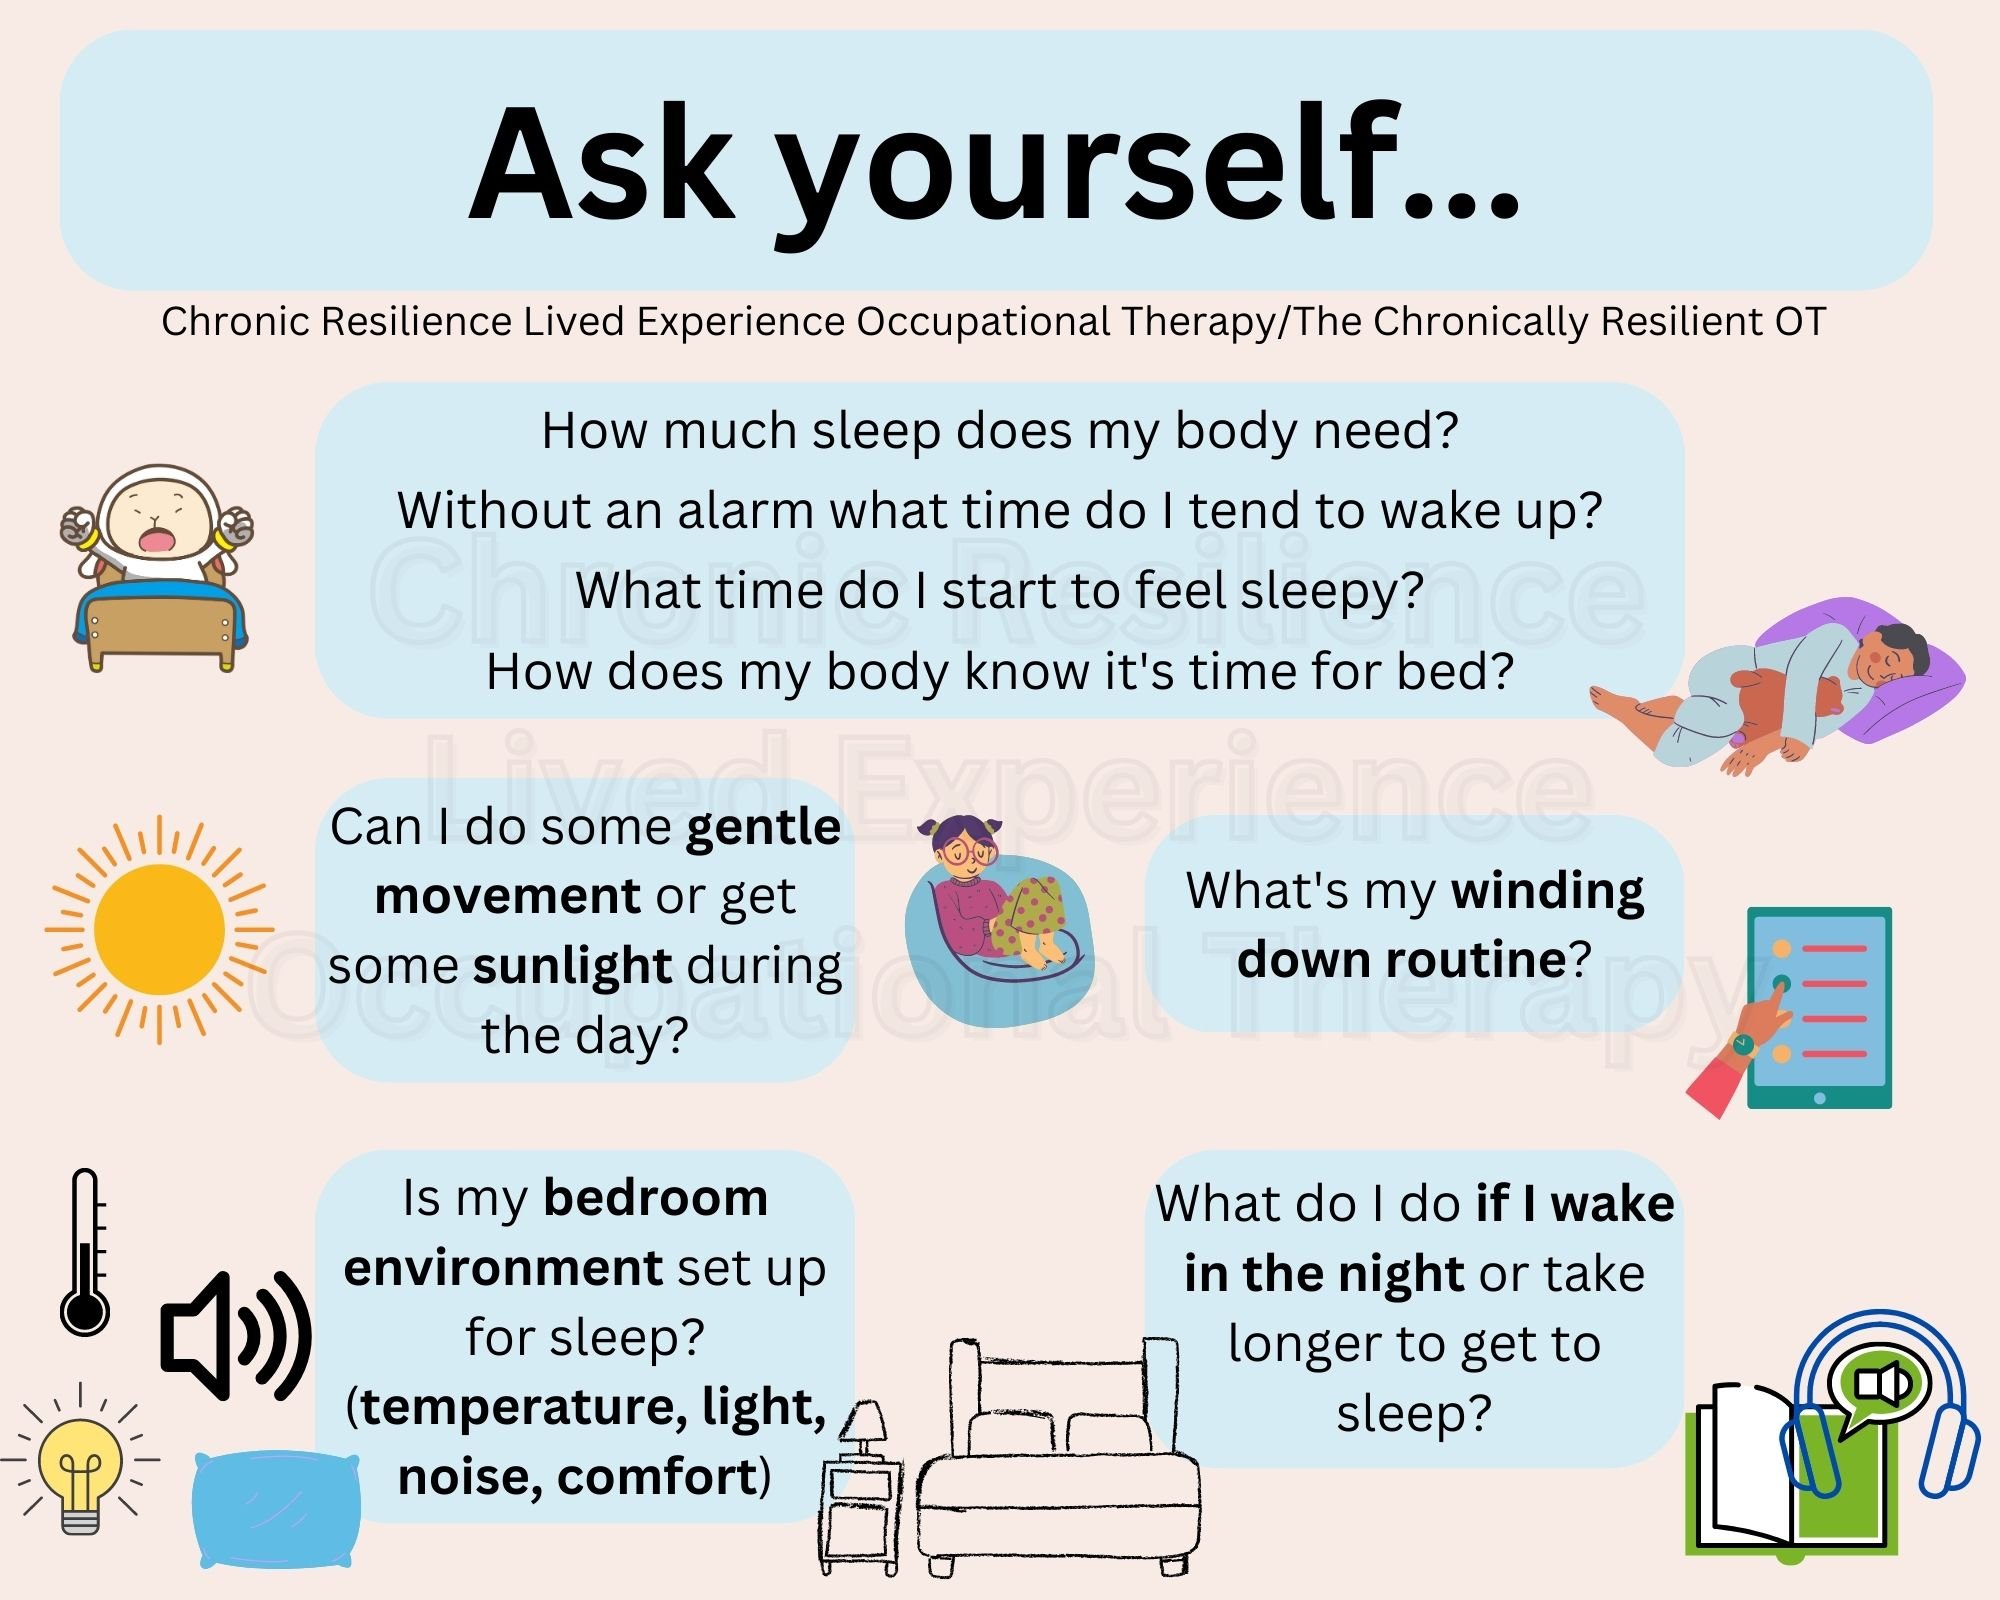  Image description: a graphic on a tan background with blue text boxes. Heading: ‘Ask yourself...’ How much sleep does my body need? Without an alarm what time do I tend to wake up? What time do I start to feel sleepy? How does my body know it's time